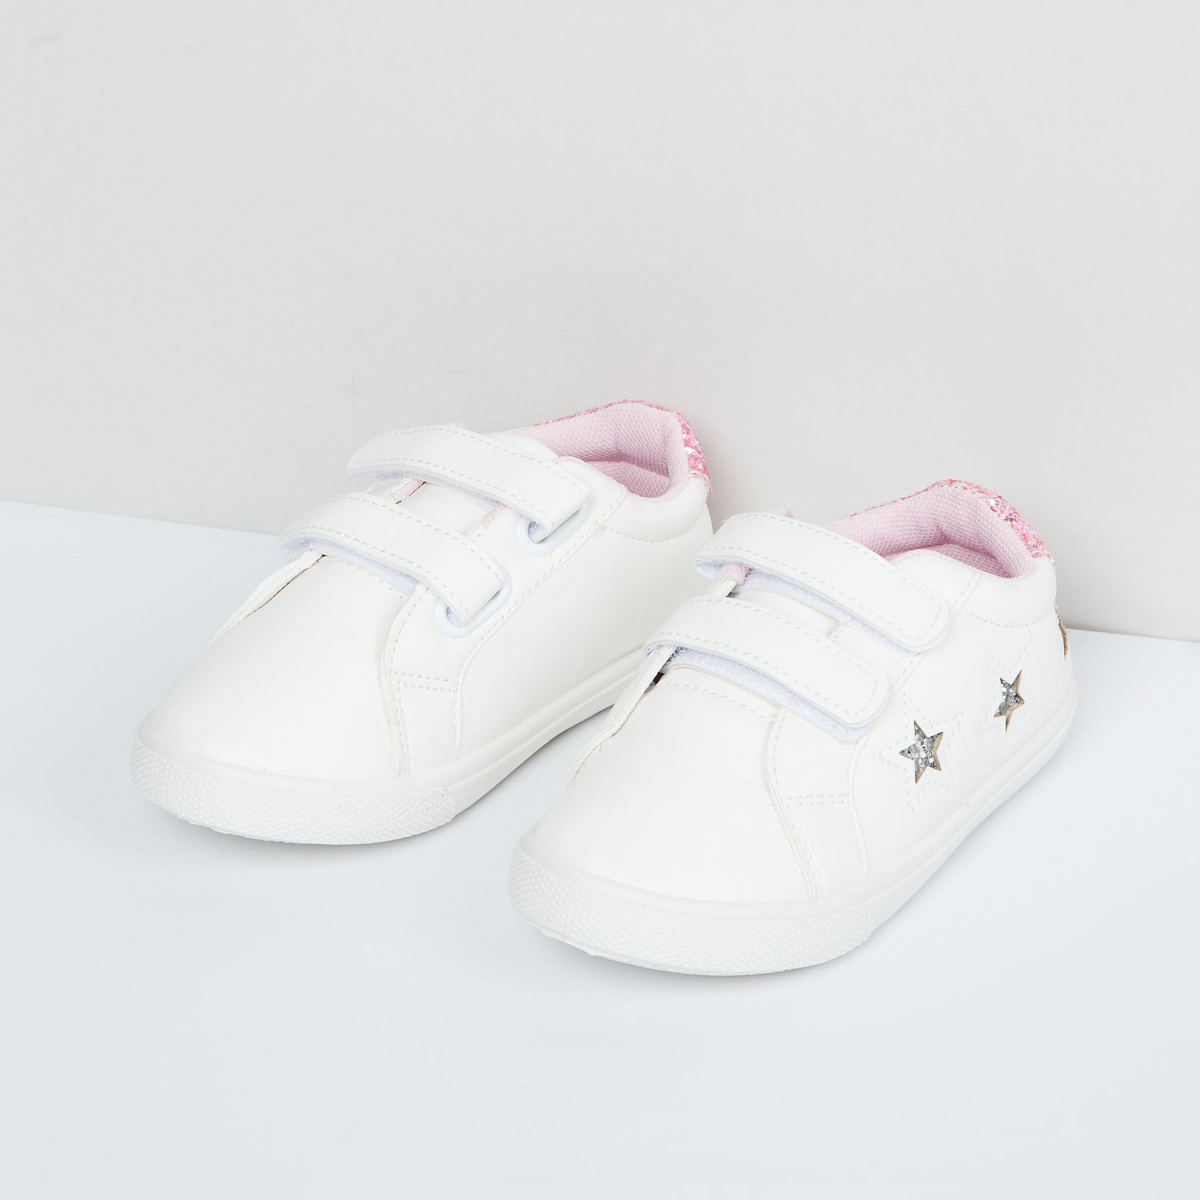 MAX Shimmery Shoes with Velcro Closure